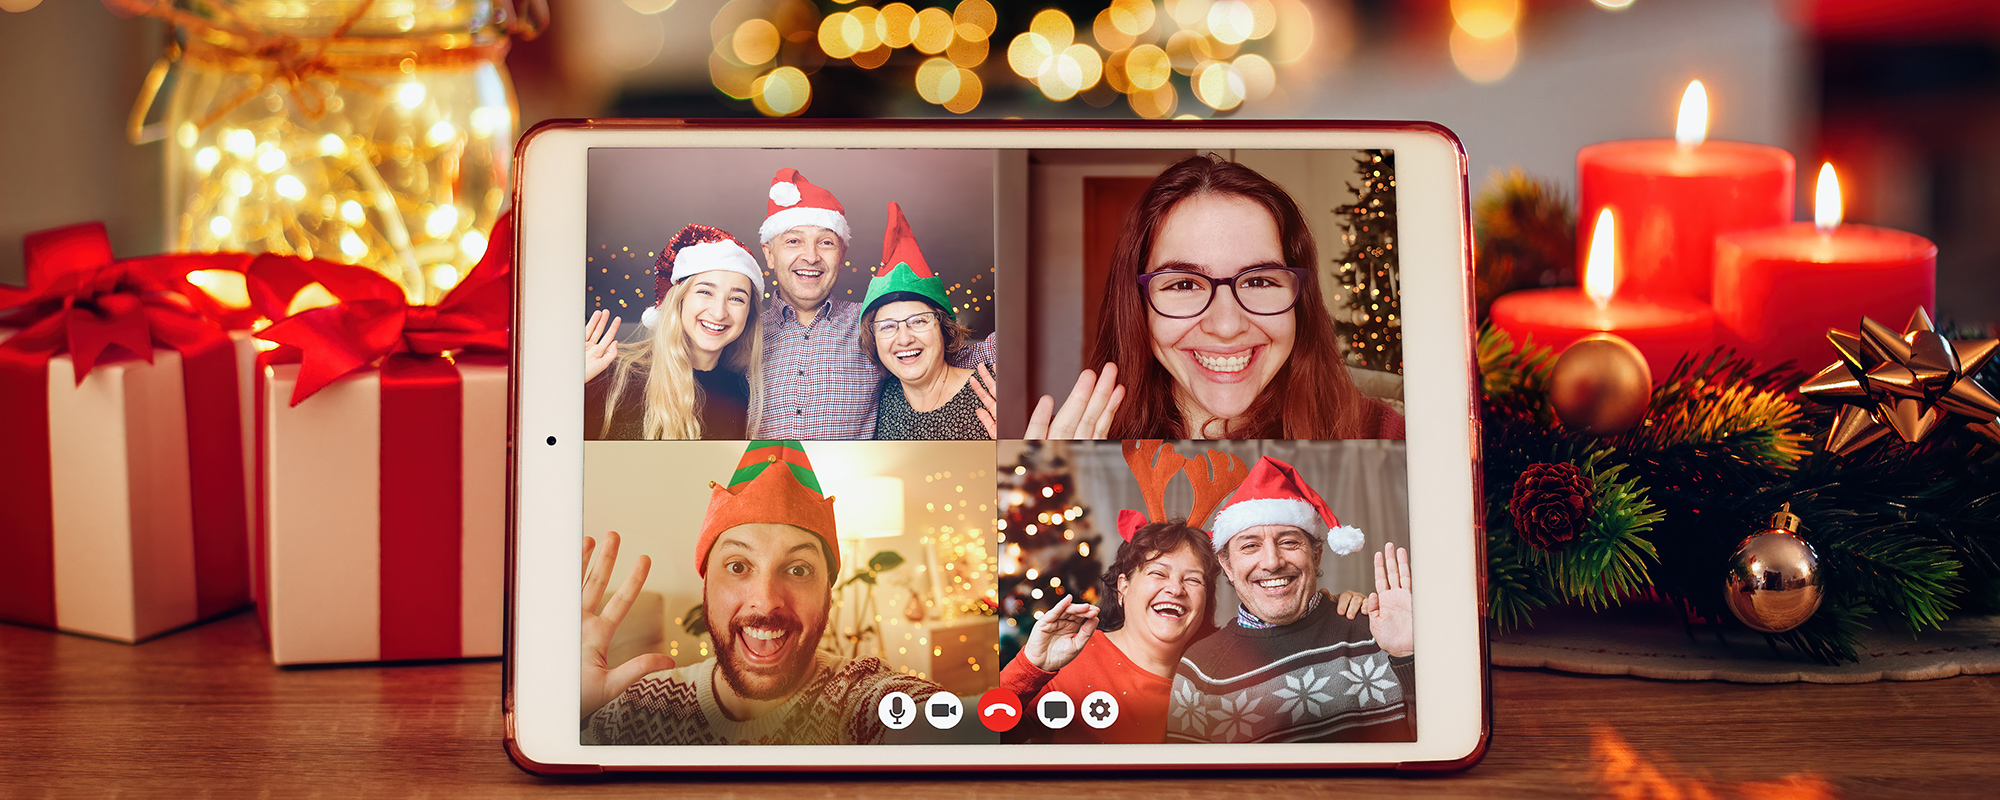 This image shows a picture of a tablet being propped up among some Christmas decorations on a table being used for a video call with four images of people waving at the person using the device. They're all very happy and festive.